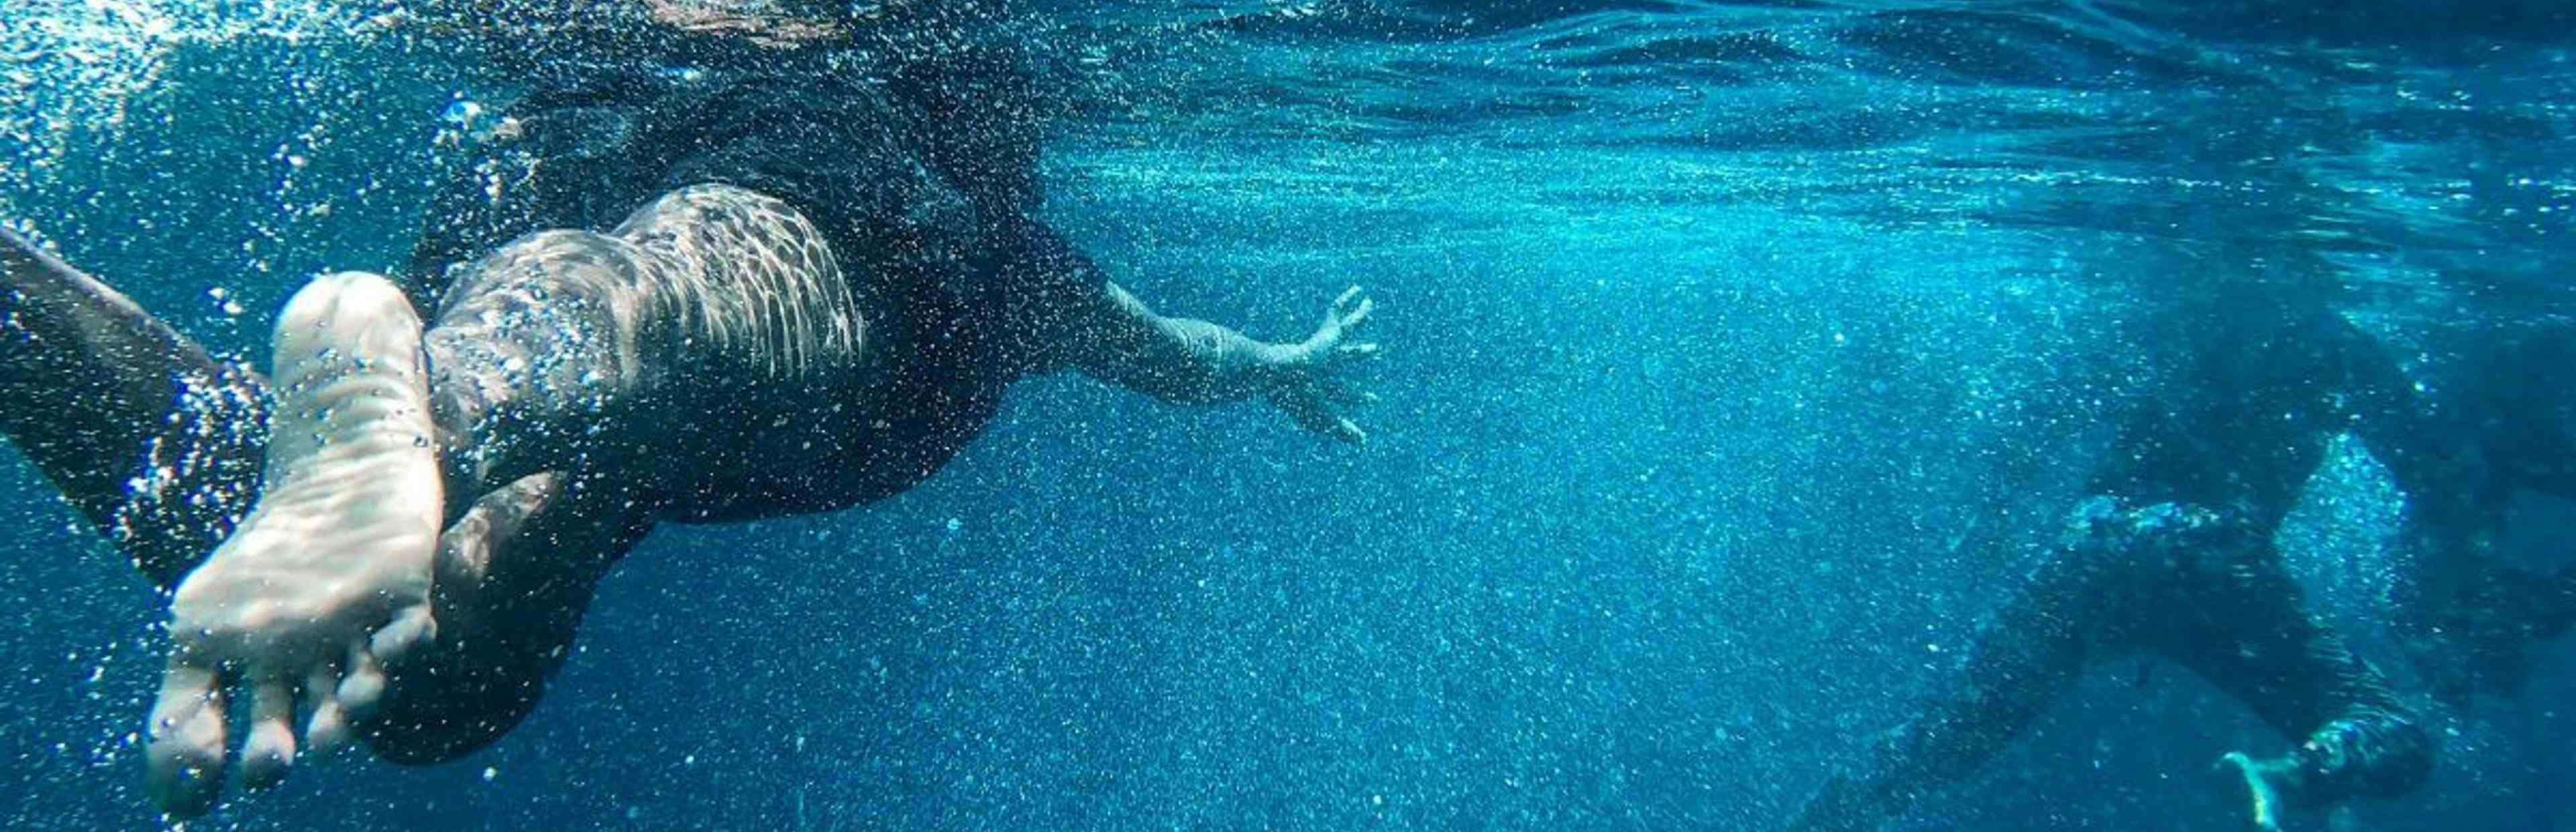 Underwater picture of swimming